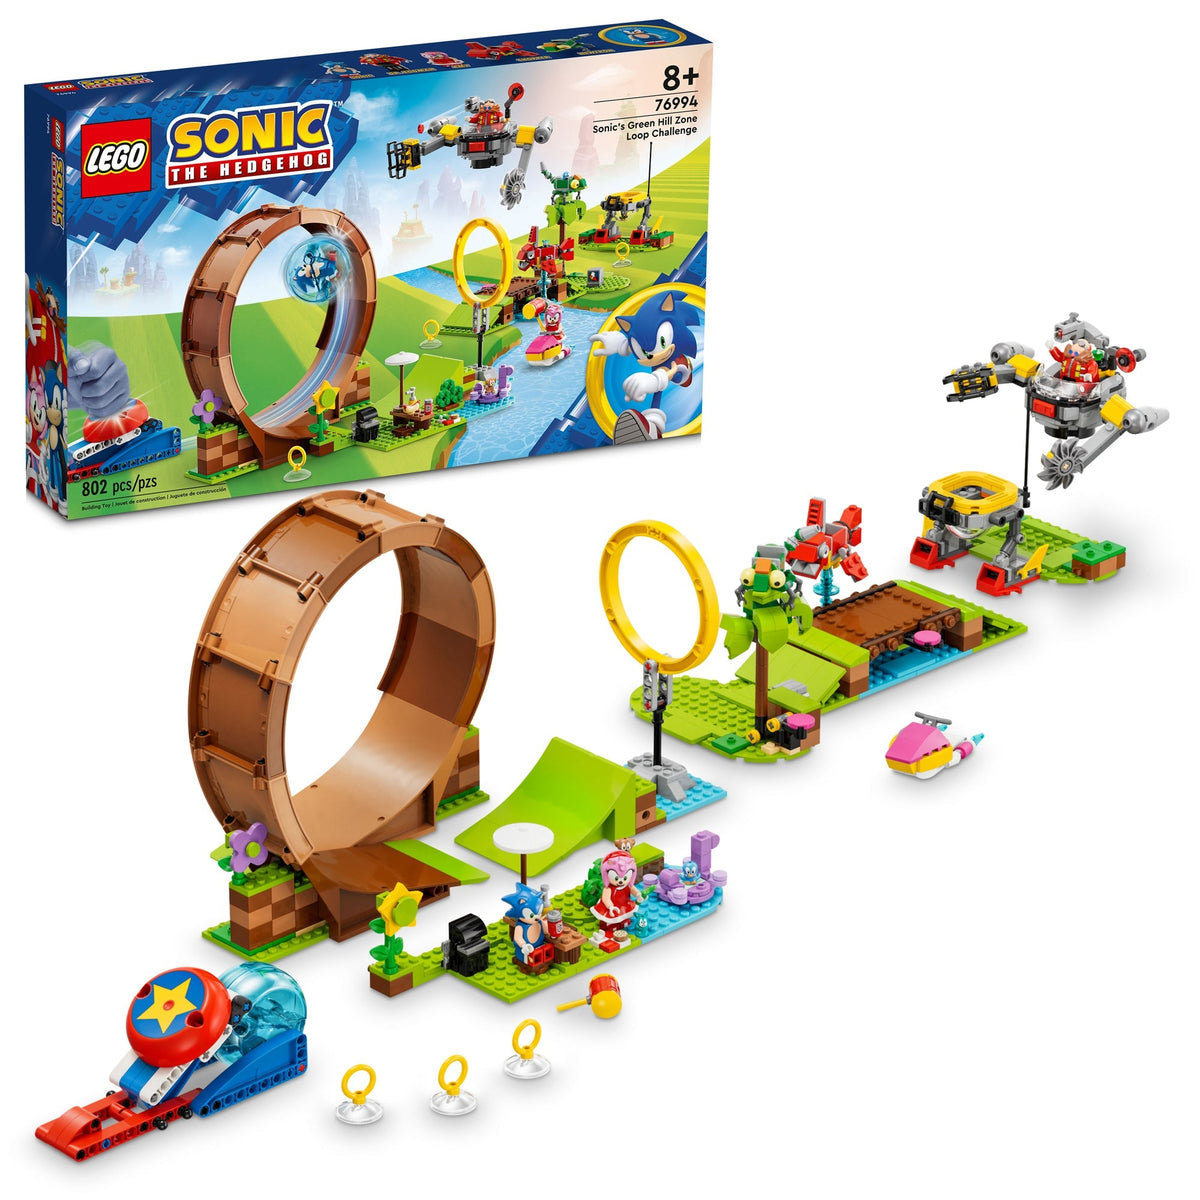 LEGO Toys & Games LEGO Sonic's Green Hill Zone Loop Challenge, 76994, Ages 8+, 802 Pieces